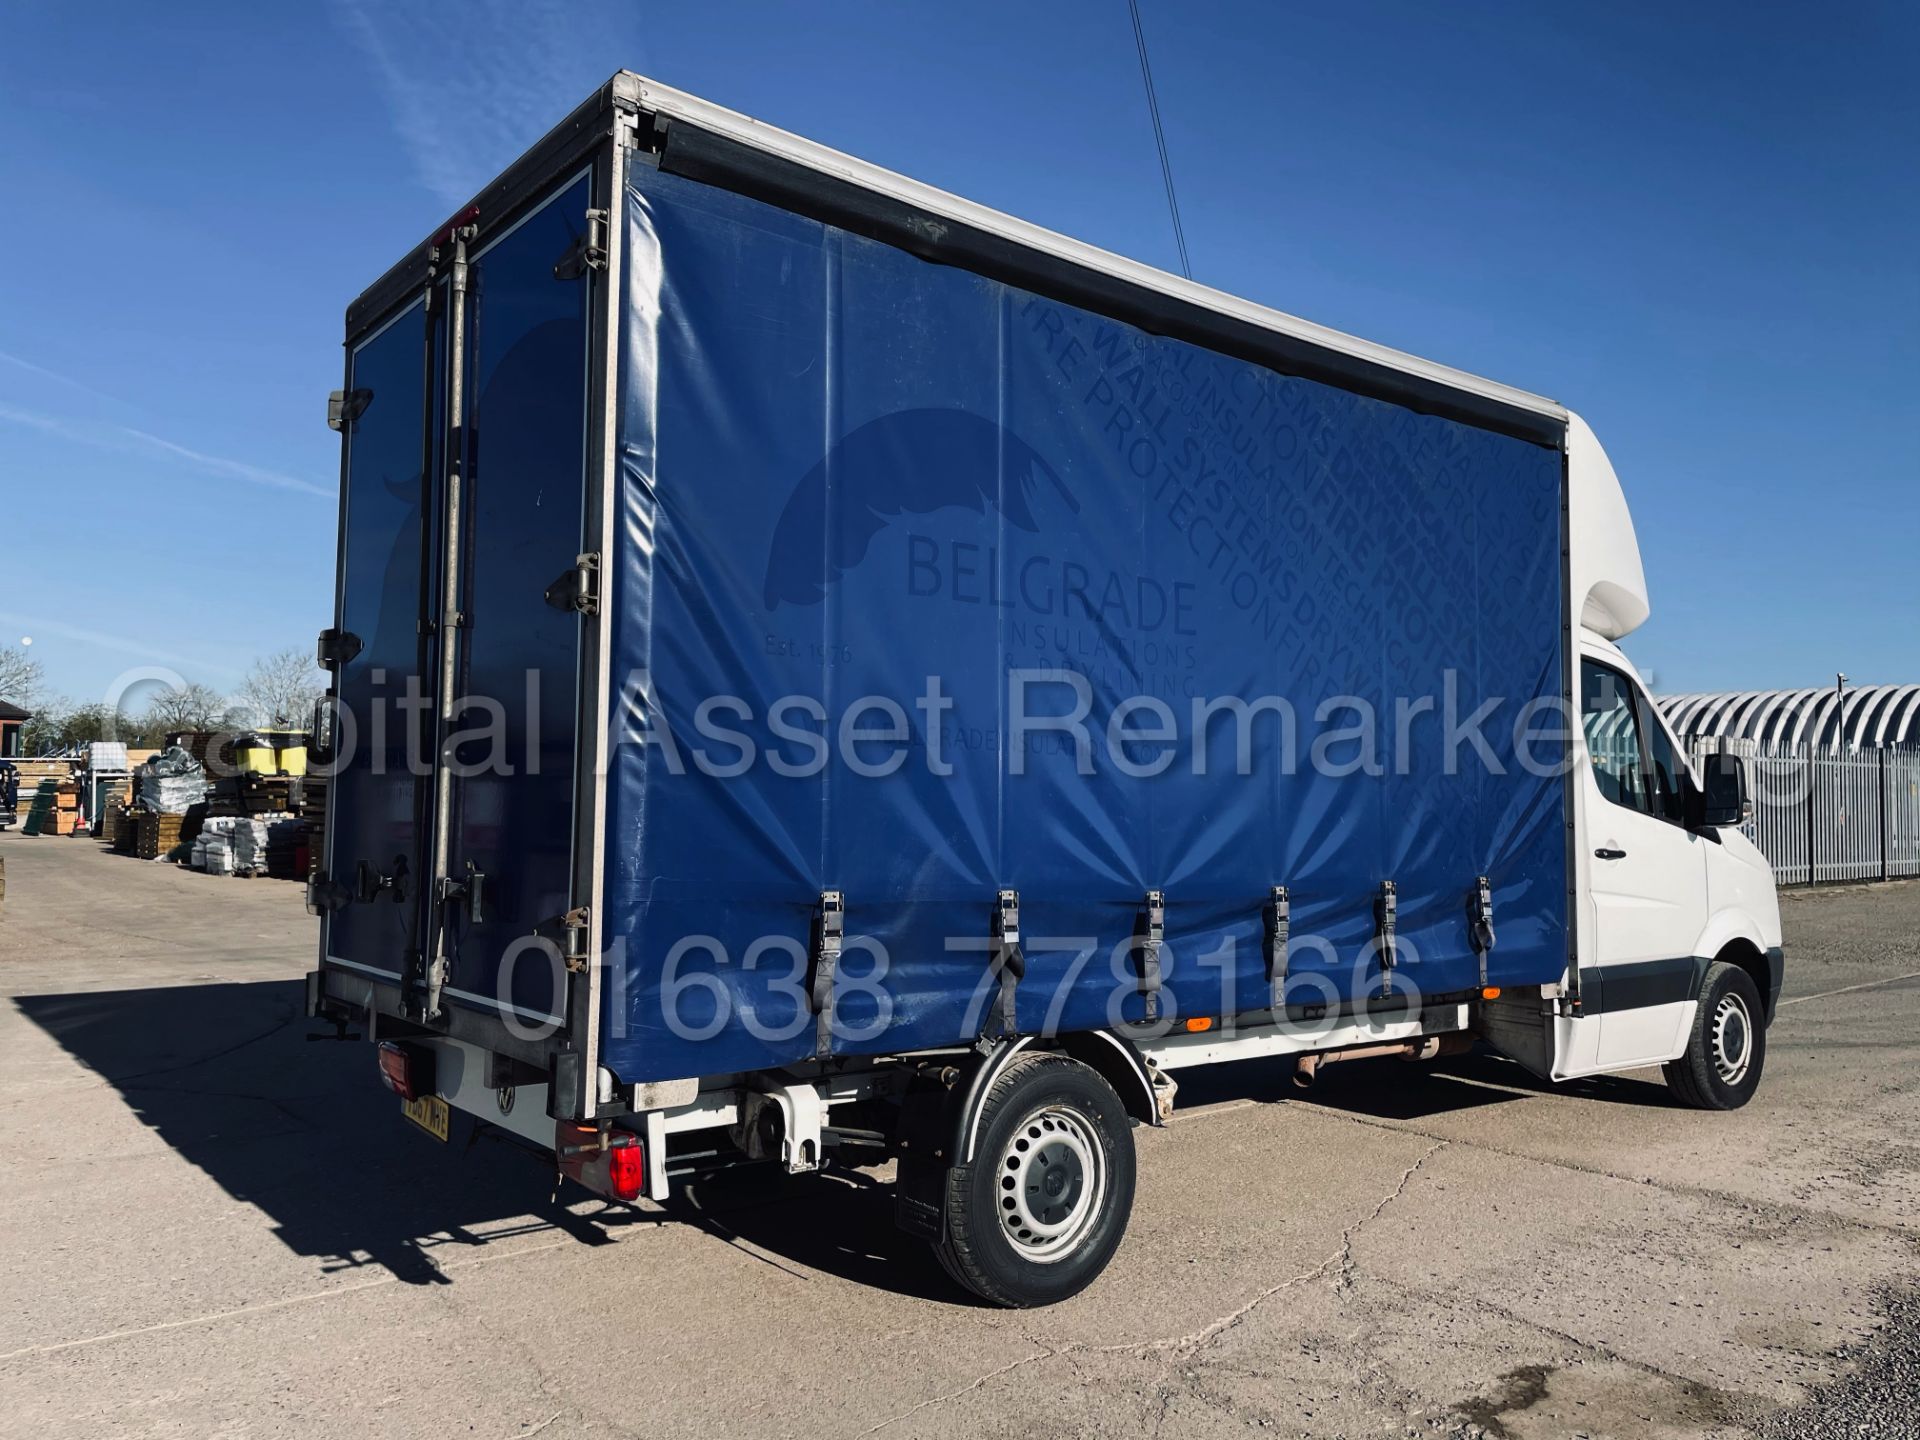 (On Sale) VOLKSWAGEN CRAFTER CR35 *LWB - CURTAIN SIDE / LUTON* (67 REG - EURO 6) '2.0 TDI - 6 SPEED' - Image 13 of 41